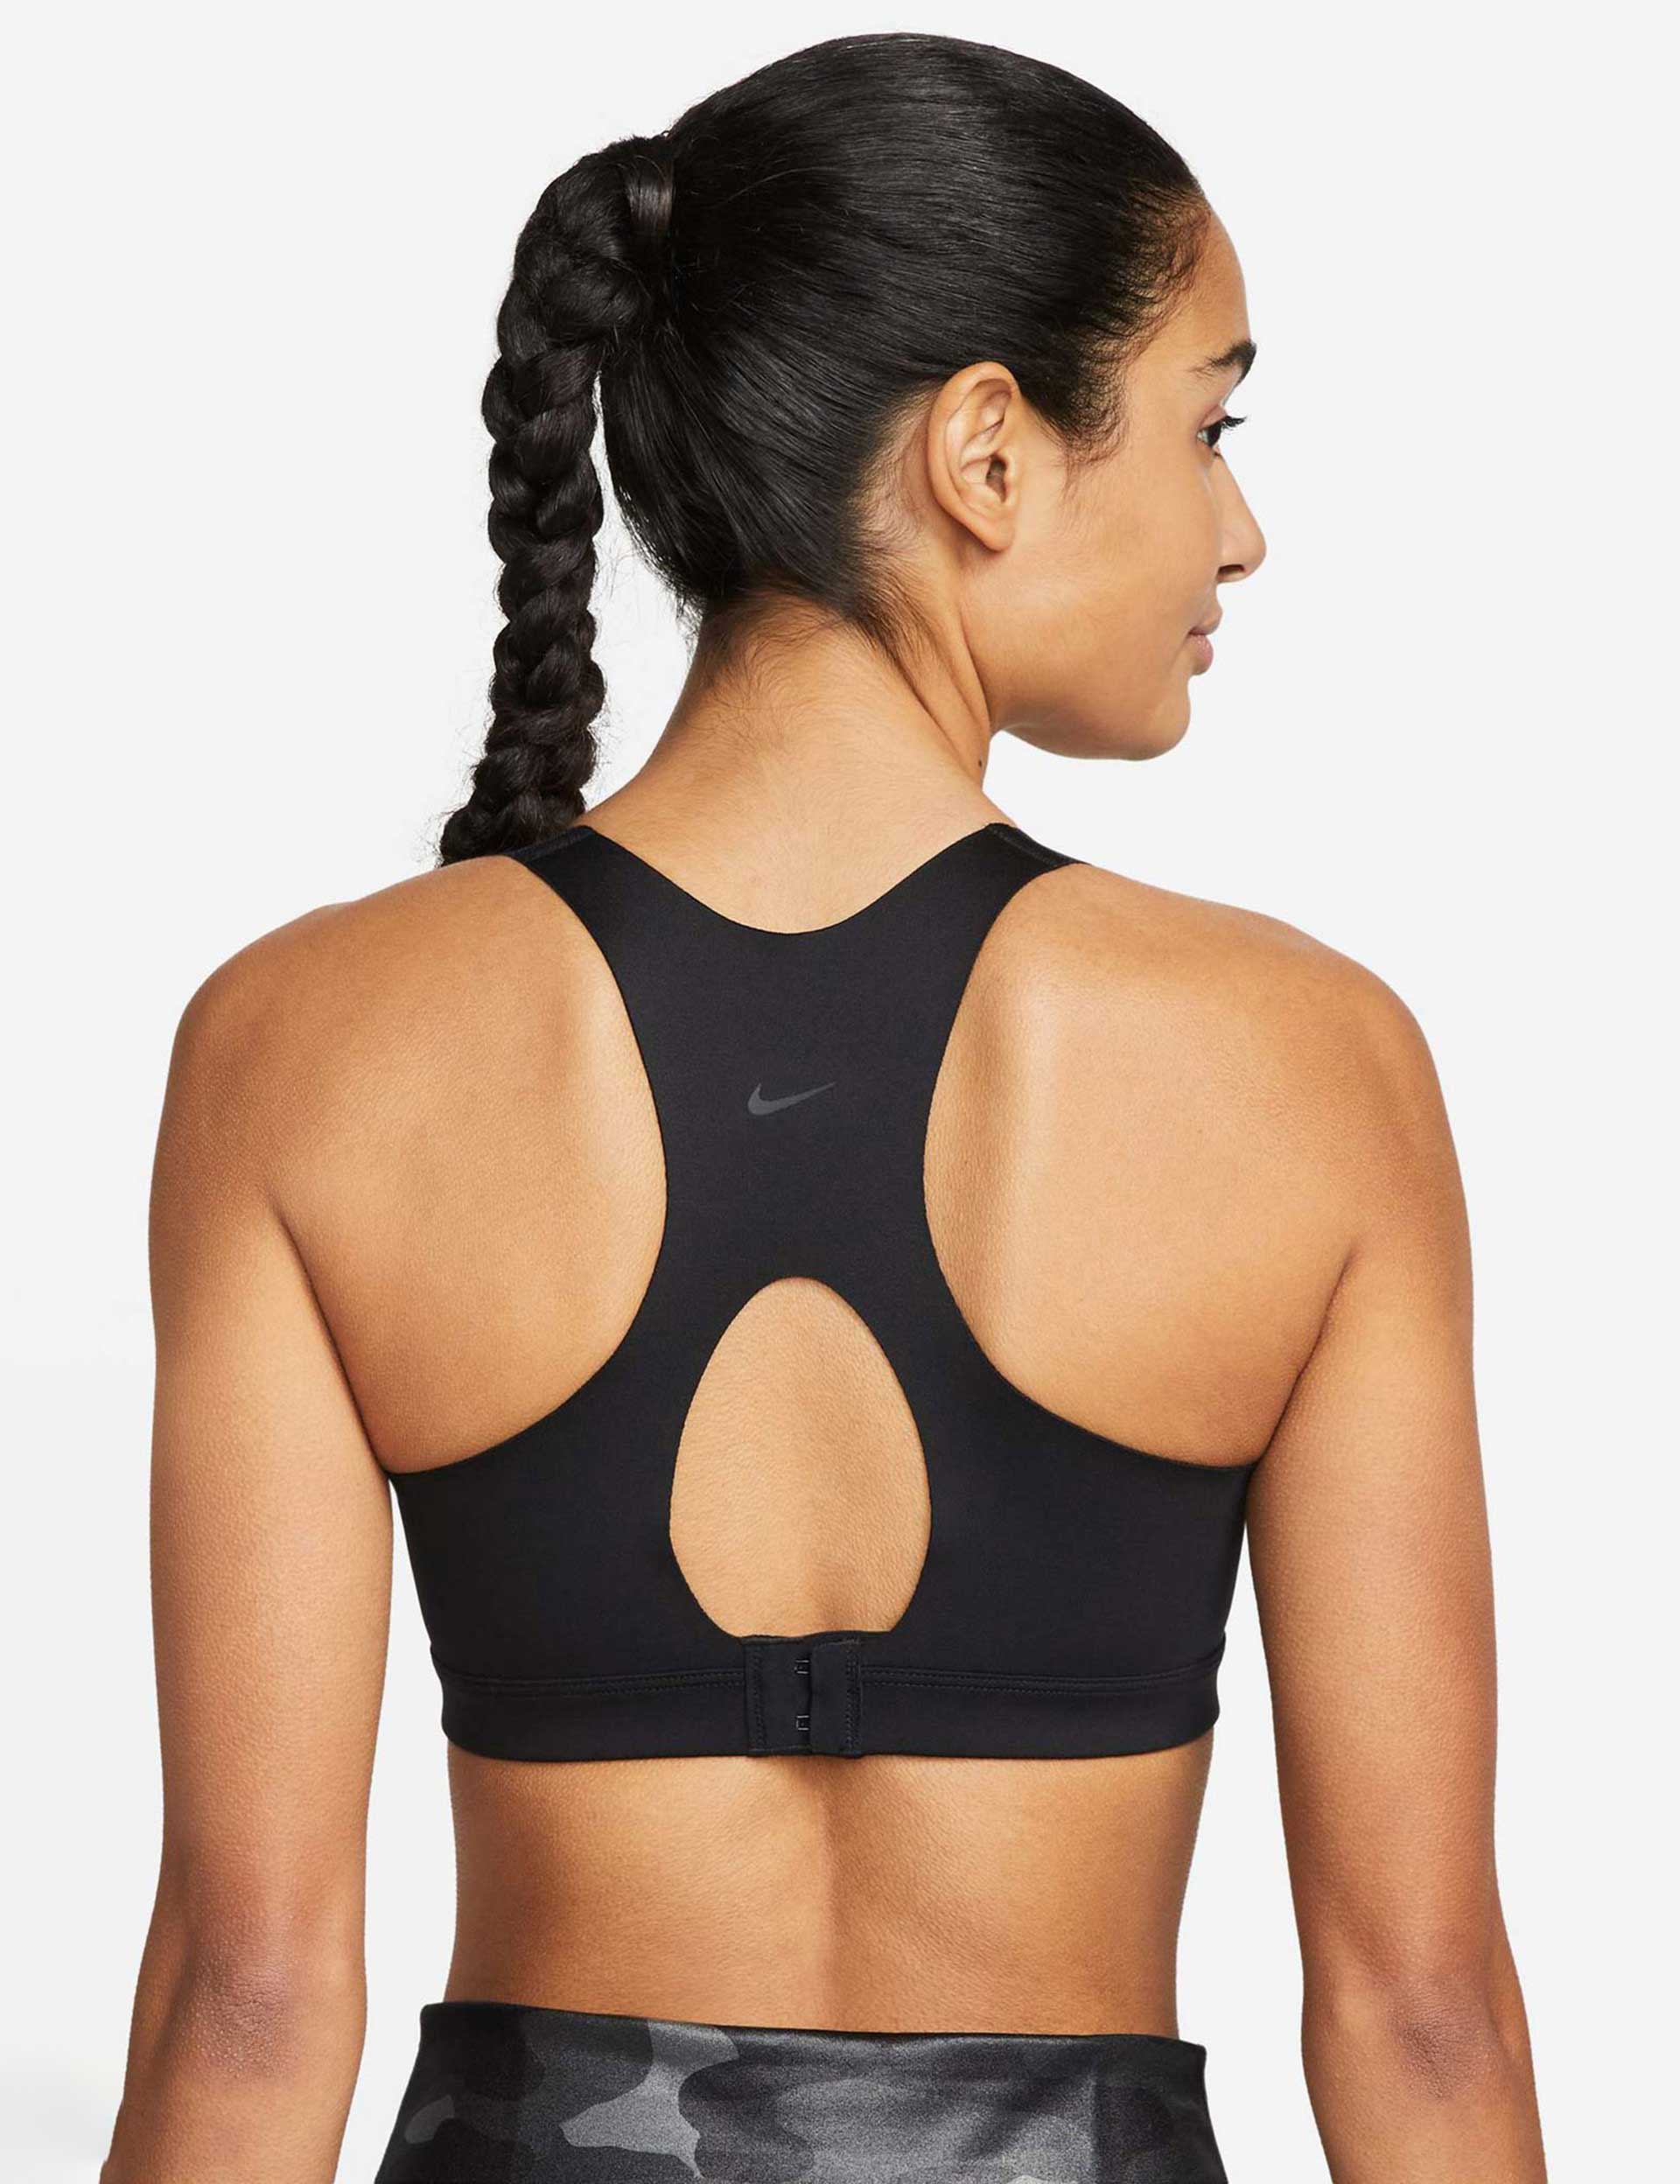 Nike Indy Sports Bra in Black [XS], Women's Fashion, Activewear on Carousell